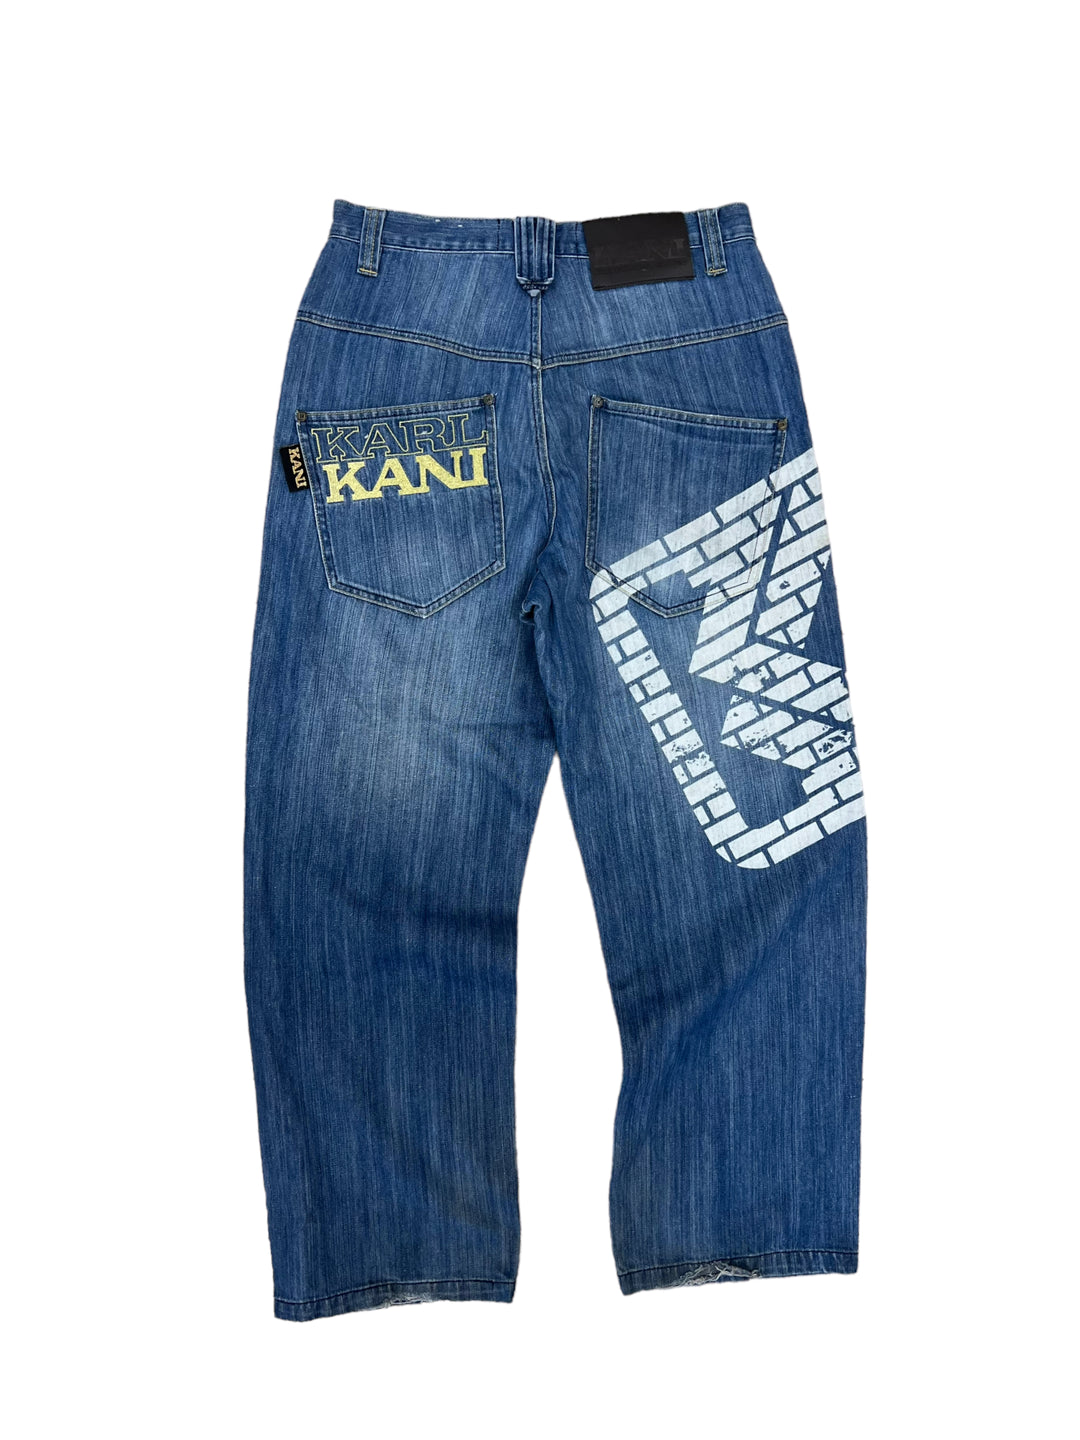 Karl Kani 90’s Baggy Fit Jeans Men’s Small